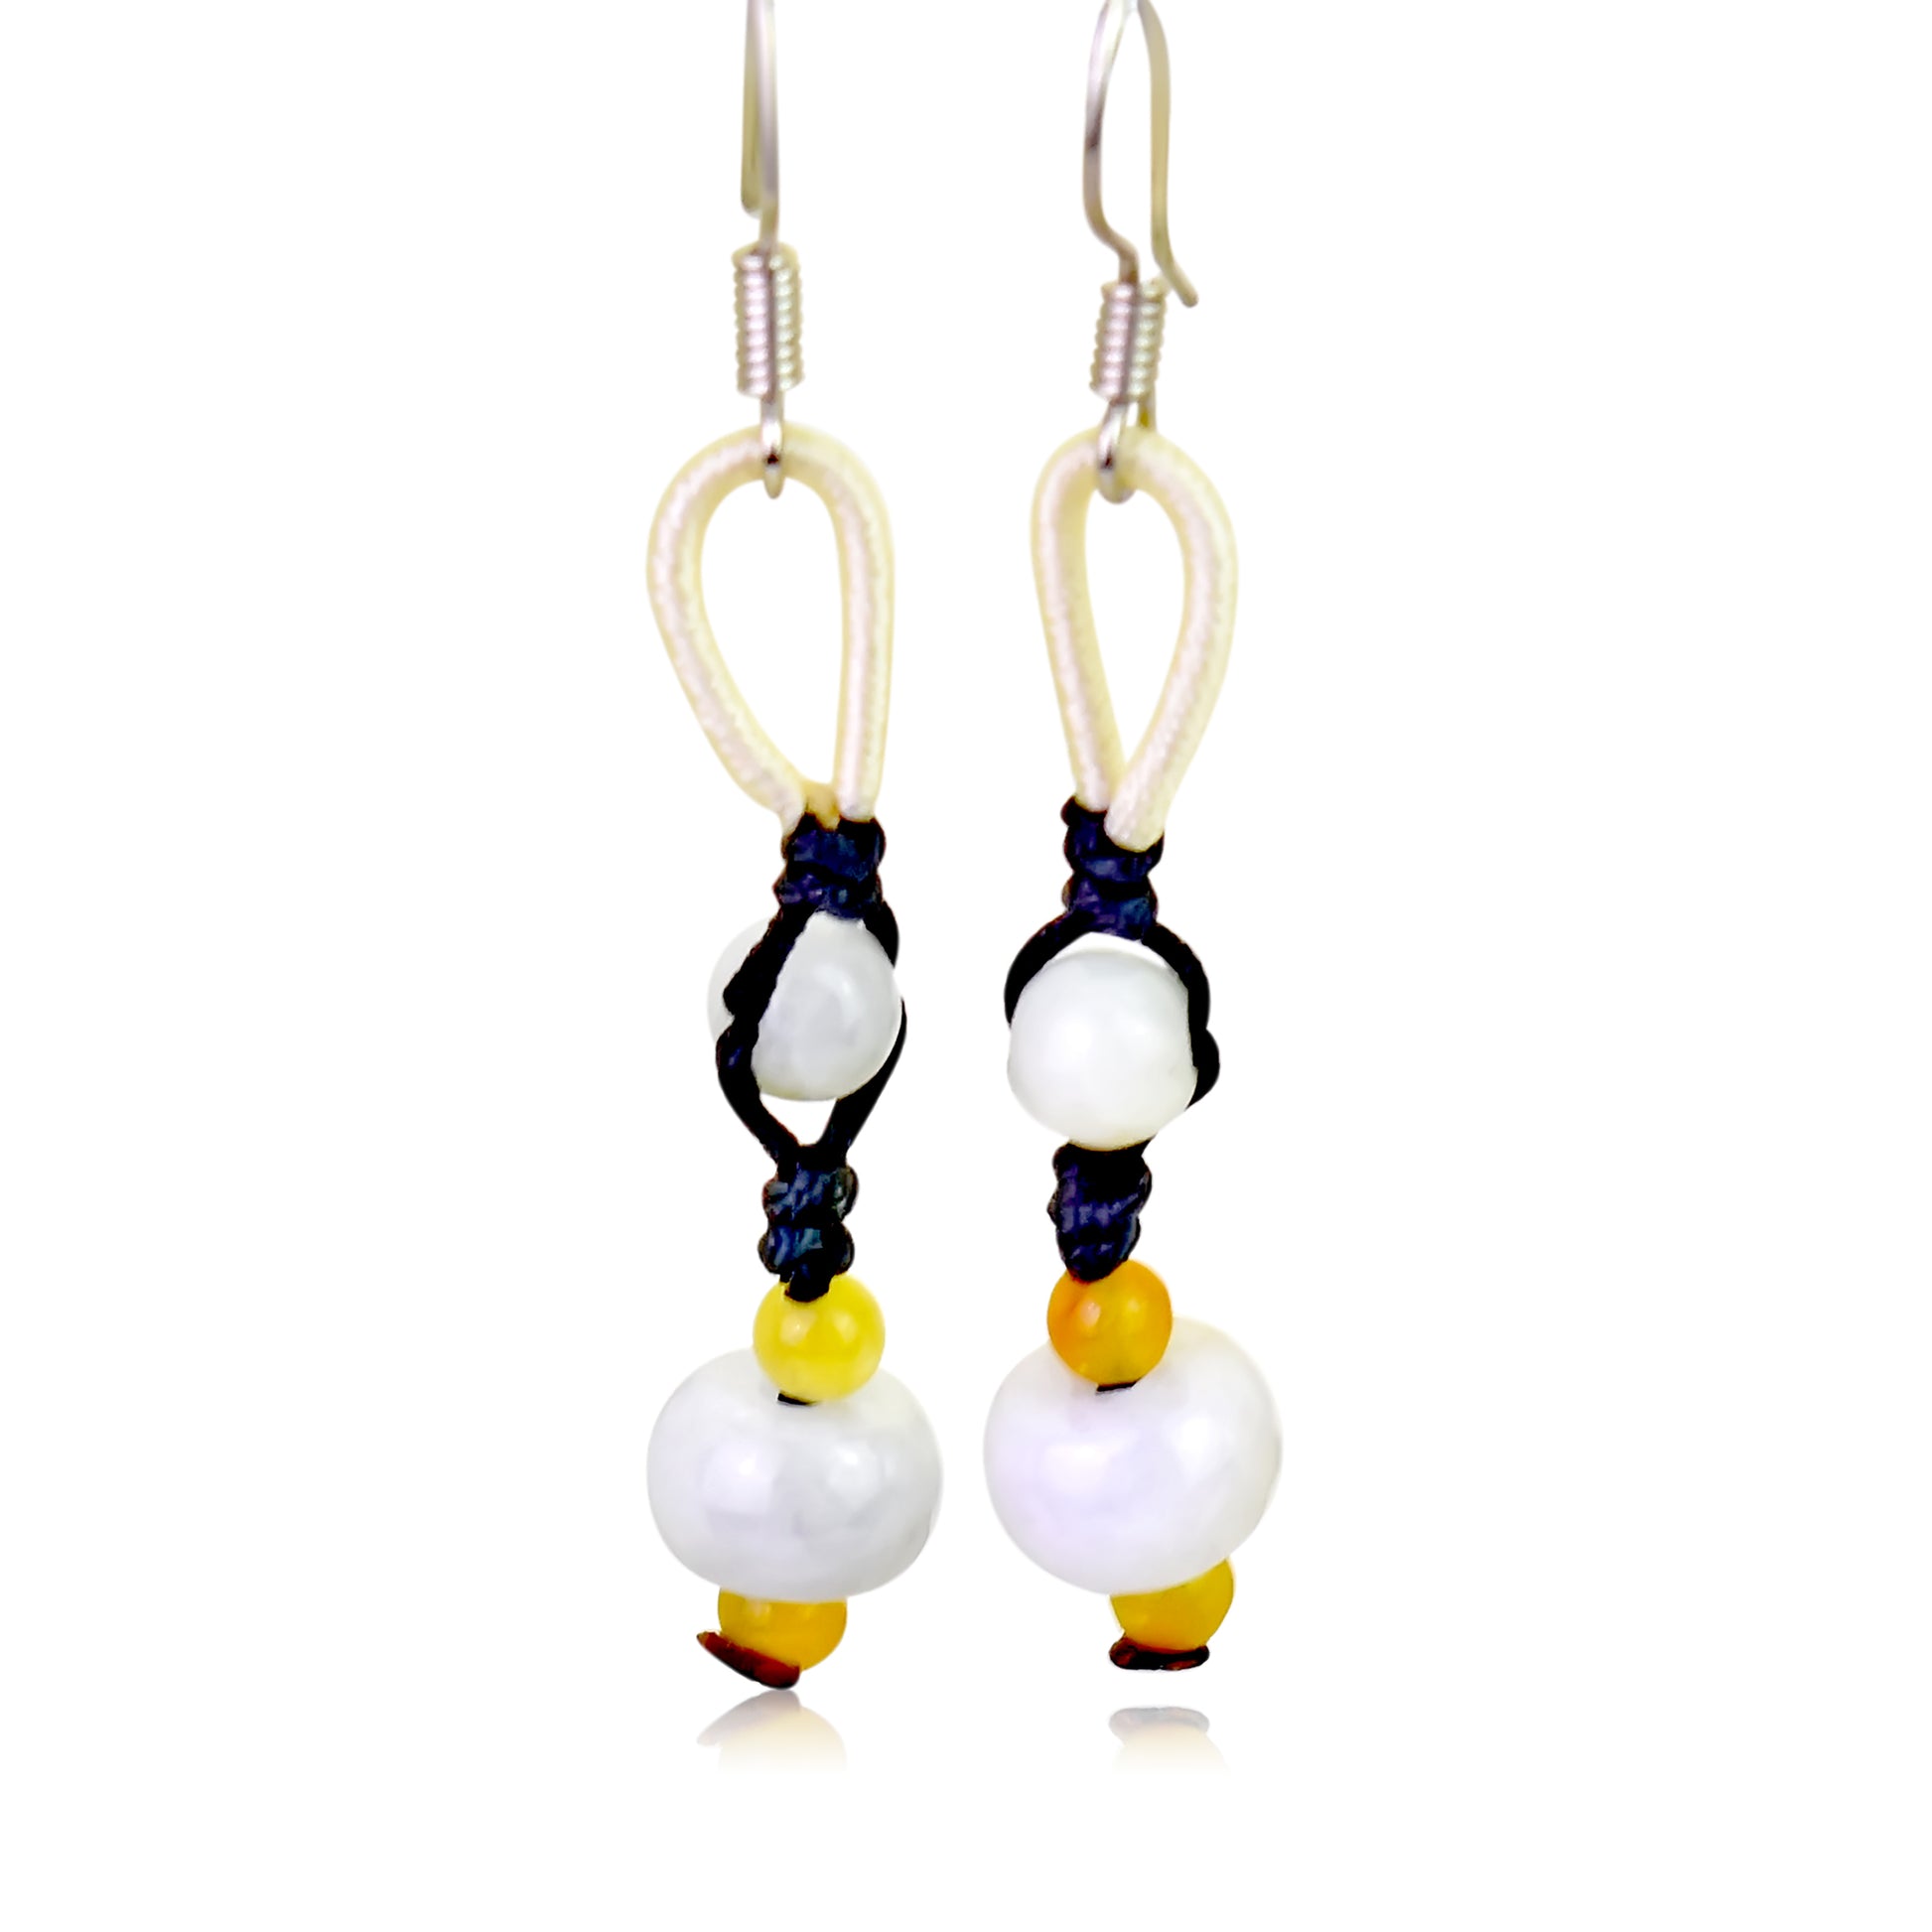 Adorn Yourself with Beautiful Spherical Jade Beads Handmade Earrings made with Black Cord